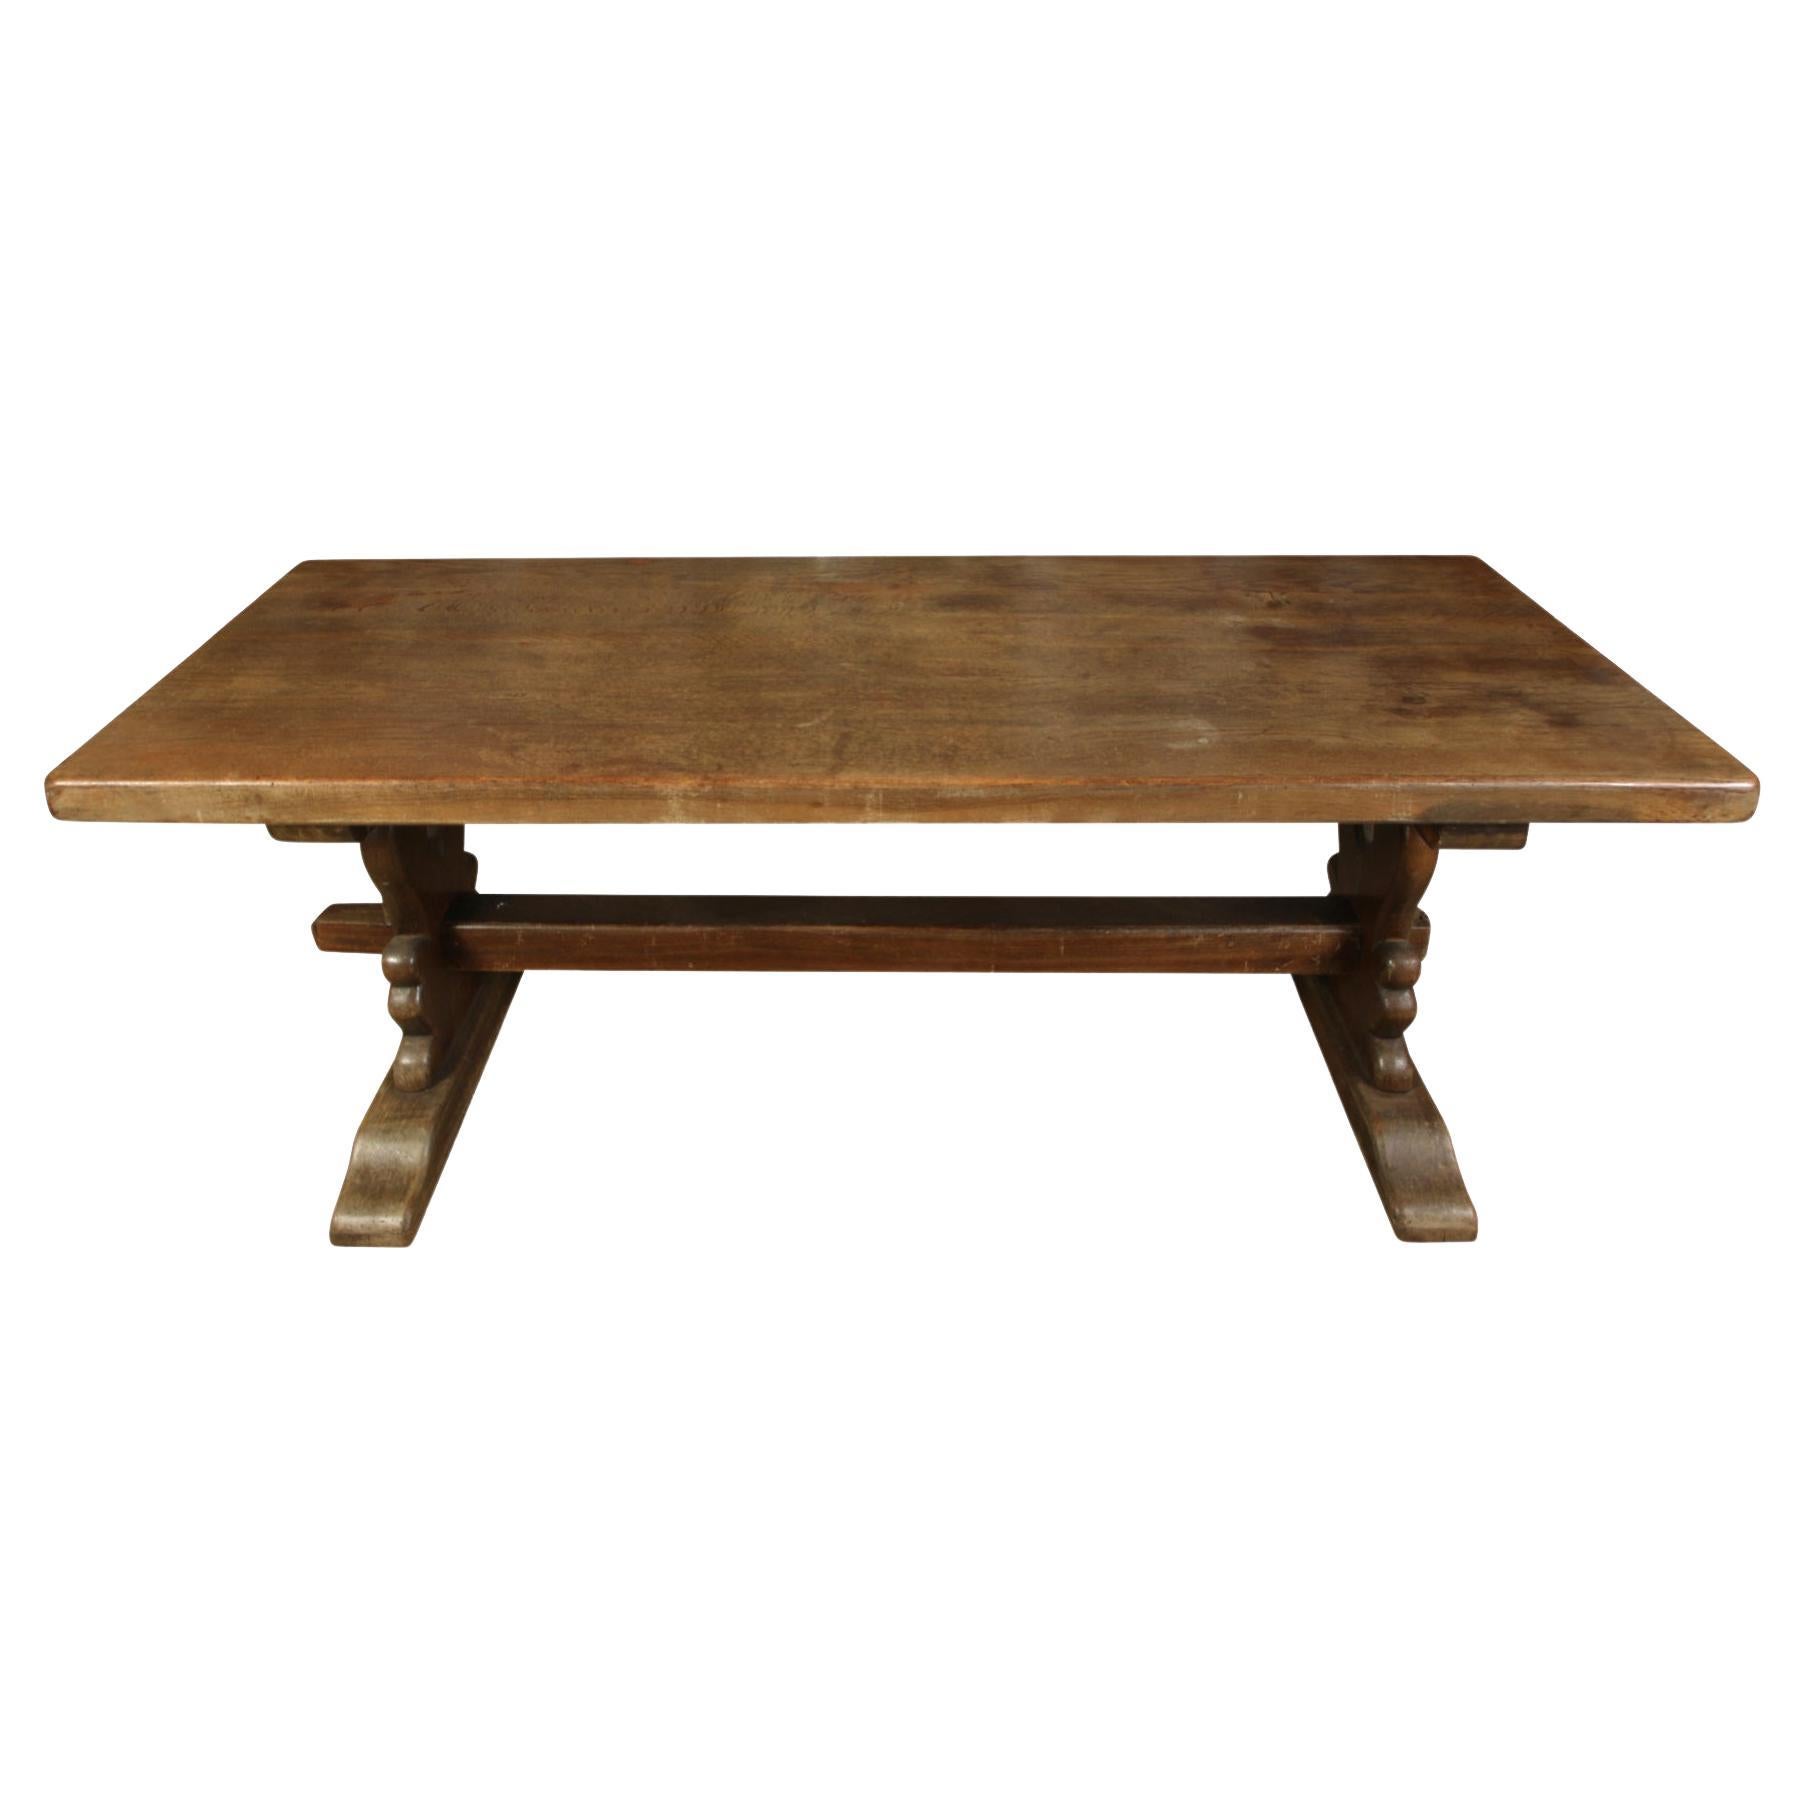 We love this piece for its wonderful color and patina. achieved only with the passage of time. This charming solid wood dining table on a trestle base seats six comfortably. Because of its versatile size, It would also serve as a console in an entry.